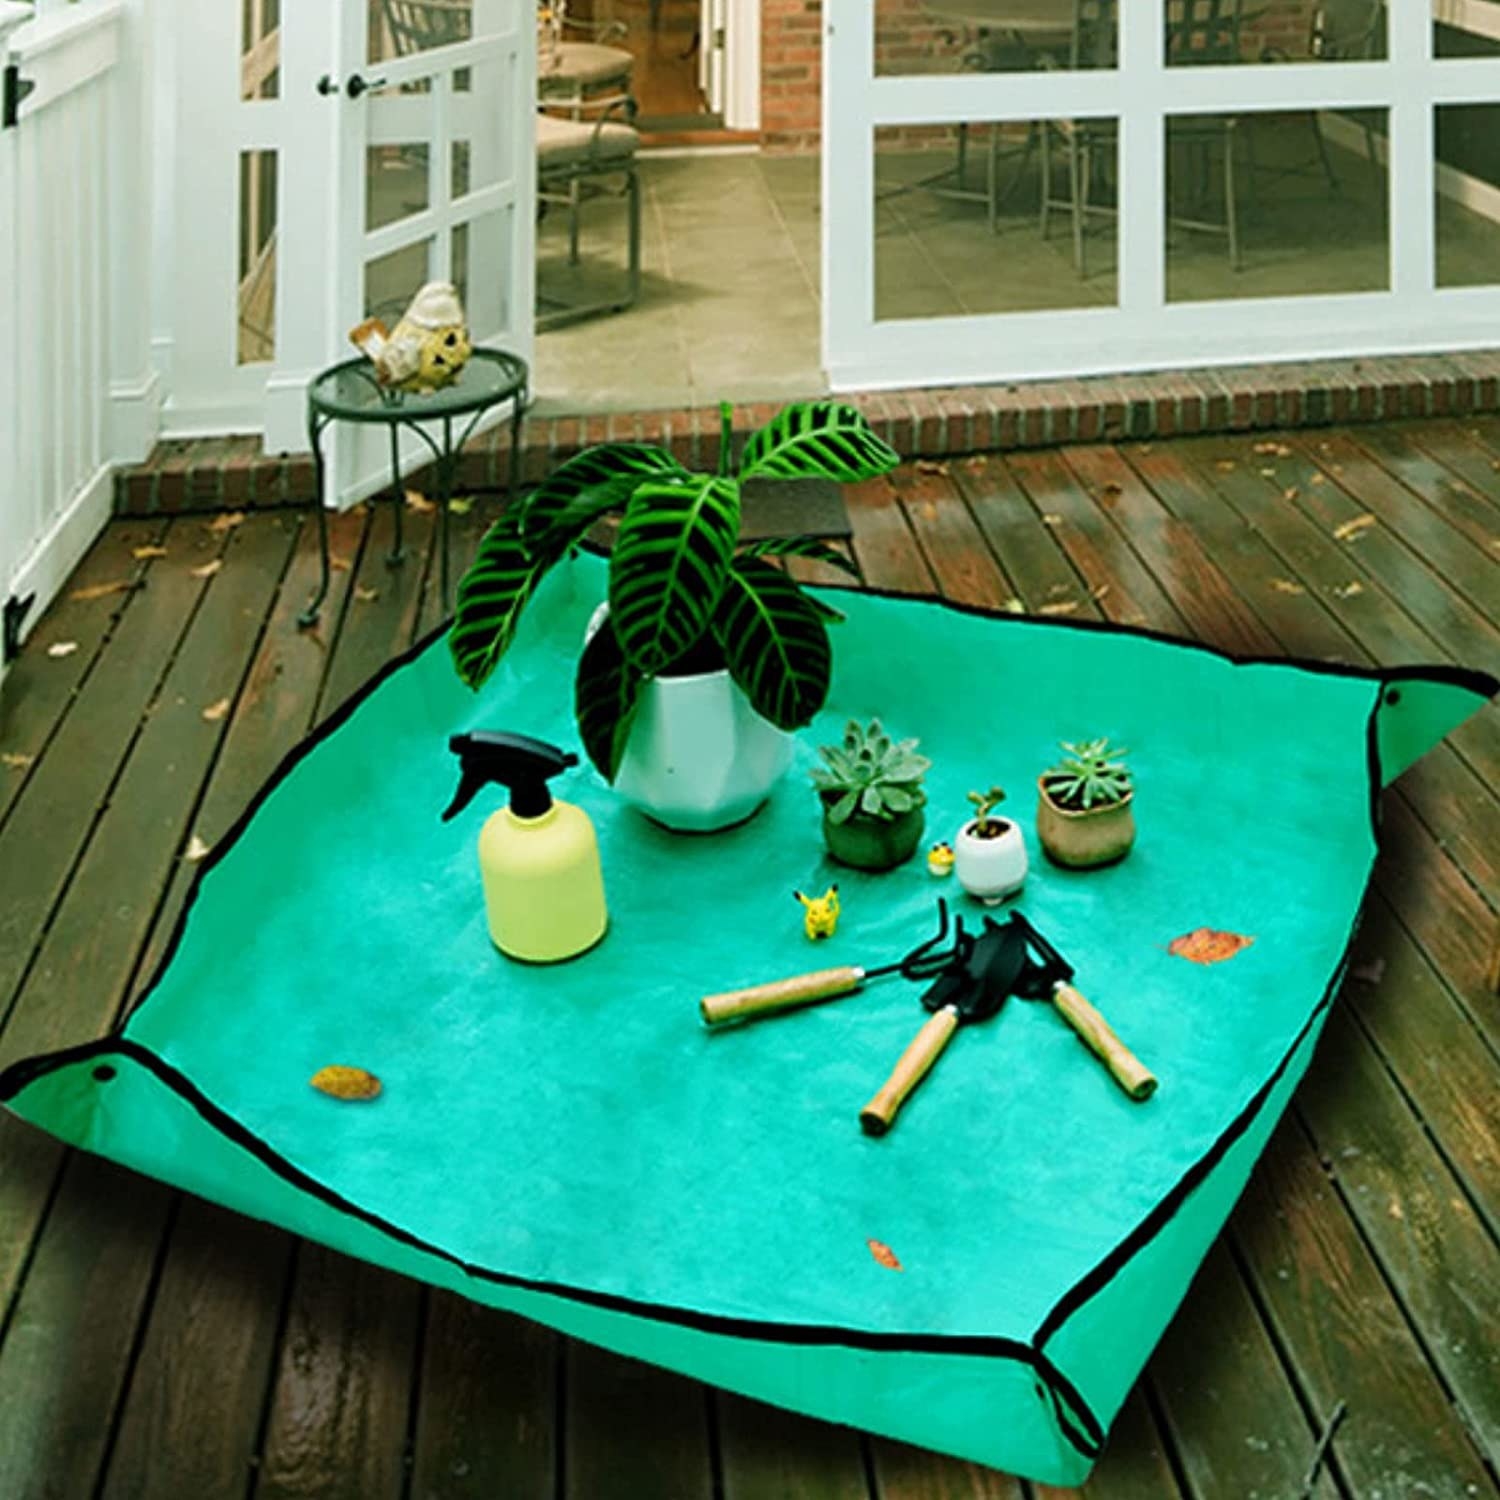 The mat with planting supplies on it while it sits on a deck